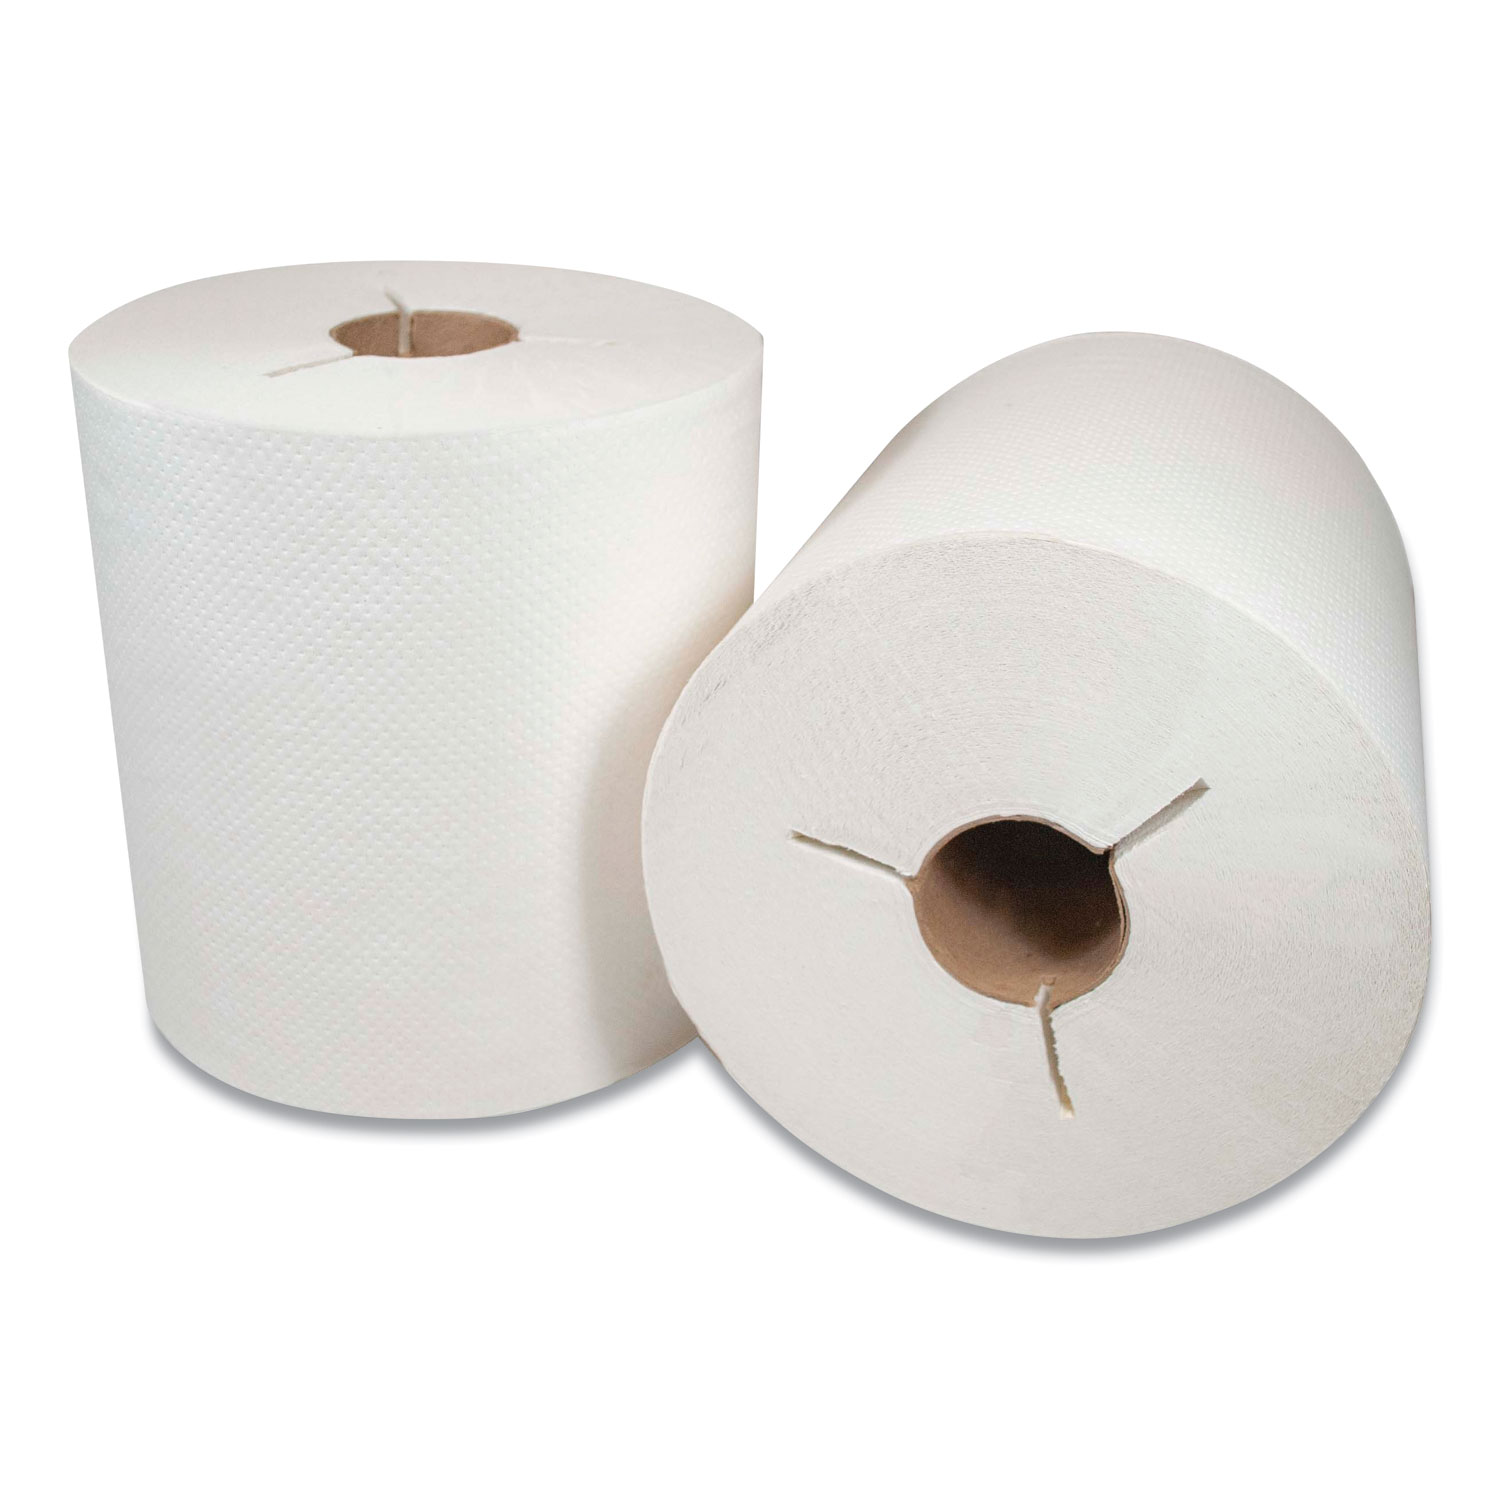 Morcon Tissue Morsoft Controlled Towels, Y-Notch, 8 x 800 ft, White, 6/Carton